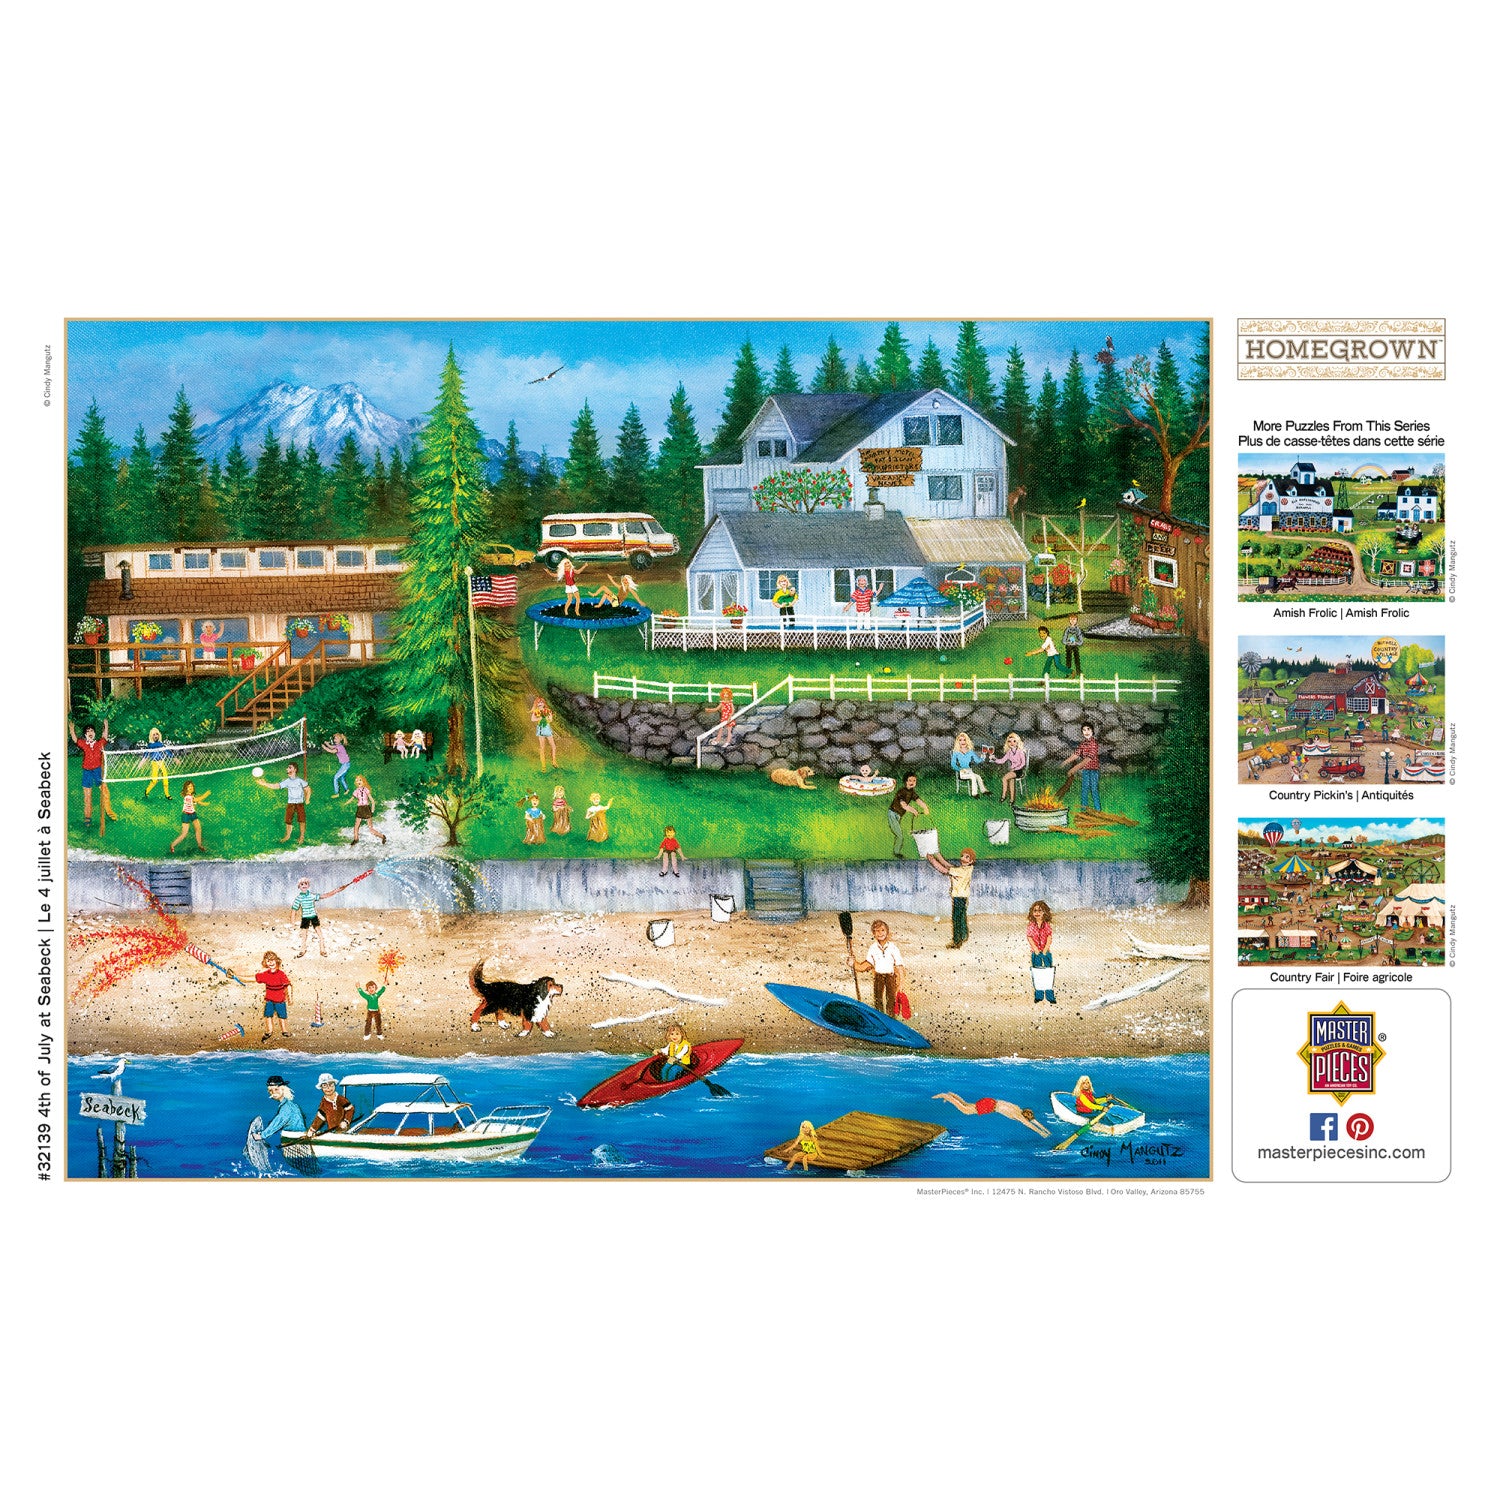 Homegrown - 4th of July at Seabeck 750 Piece Jigsaw Puzzle